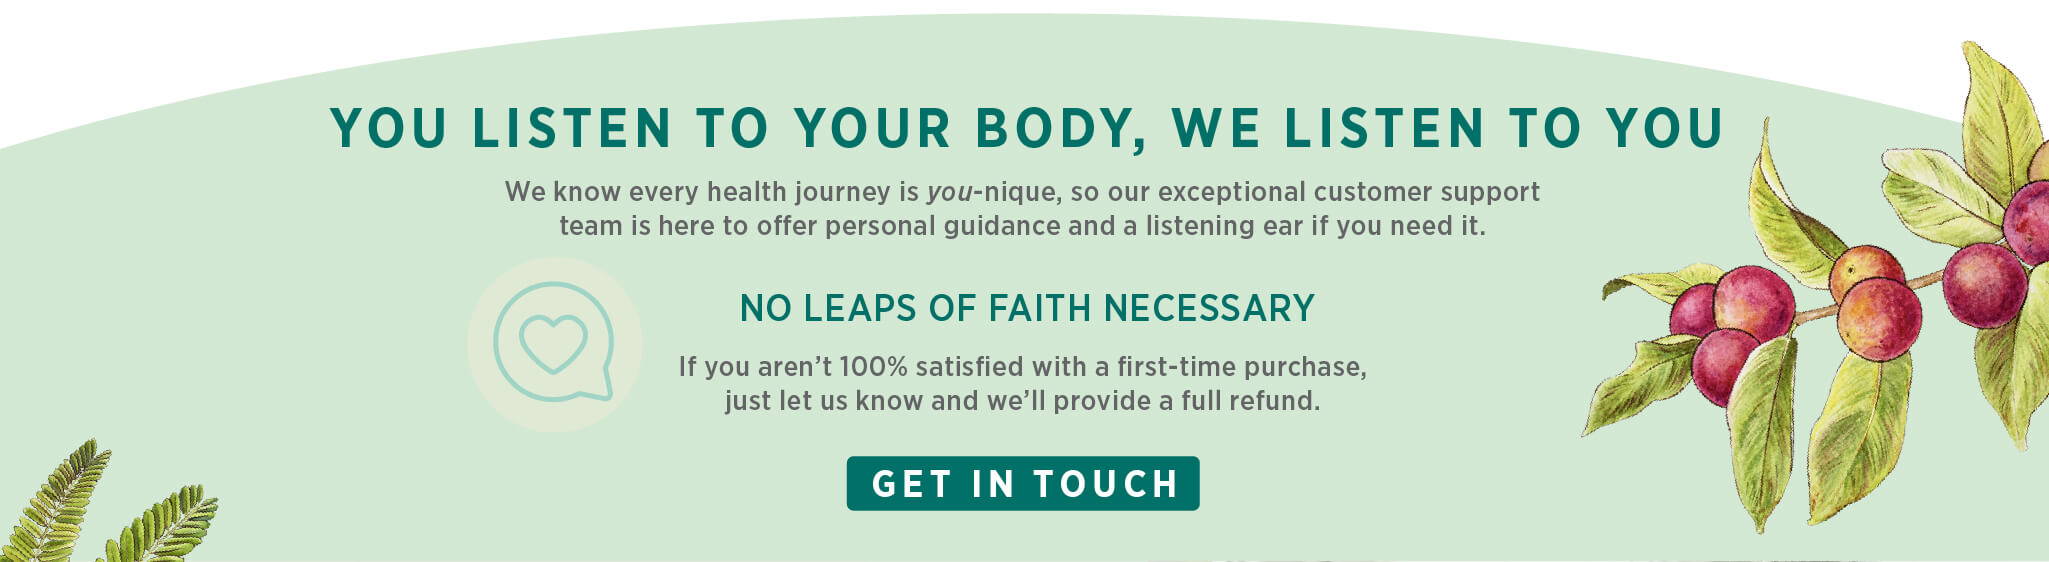 You listen to your body, we listen to you. We know wellness is one-size-fits-you, so our exceptional customer support team is here to offer a listening ear and guidance if you need it. No leaps of faith necessary: If you aren’t 100% satisfied with a first-time purchase, just let us know and we’ll provide a full refund.